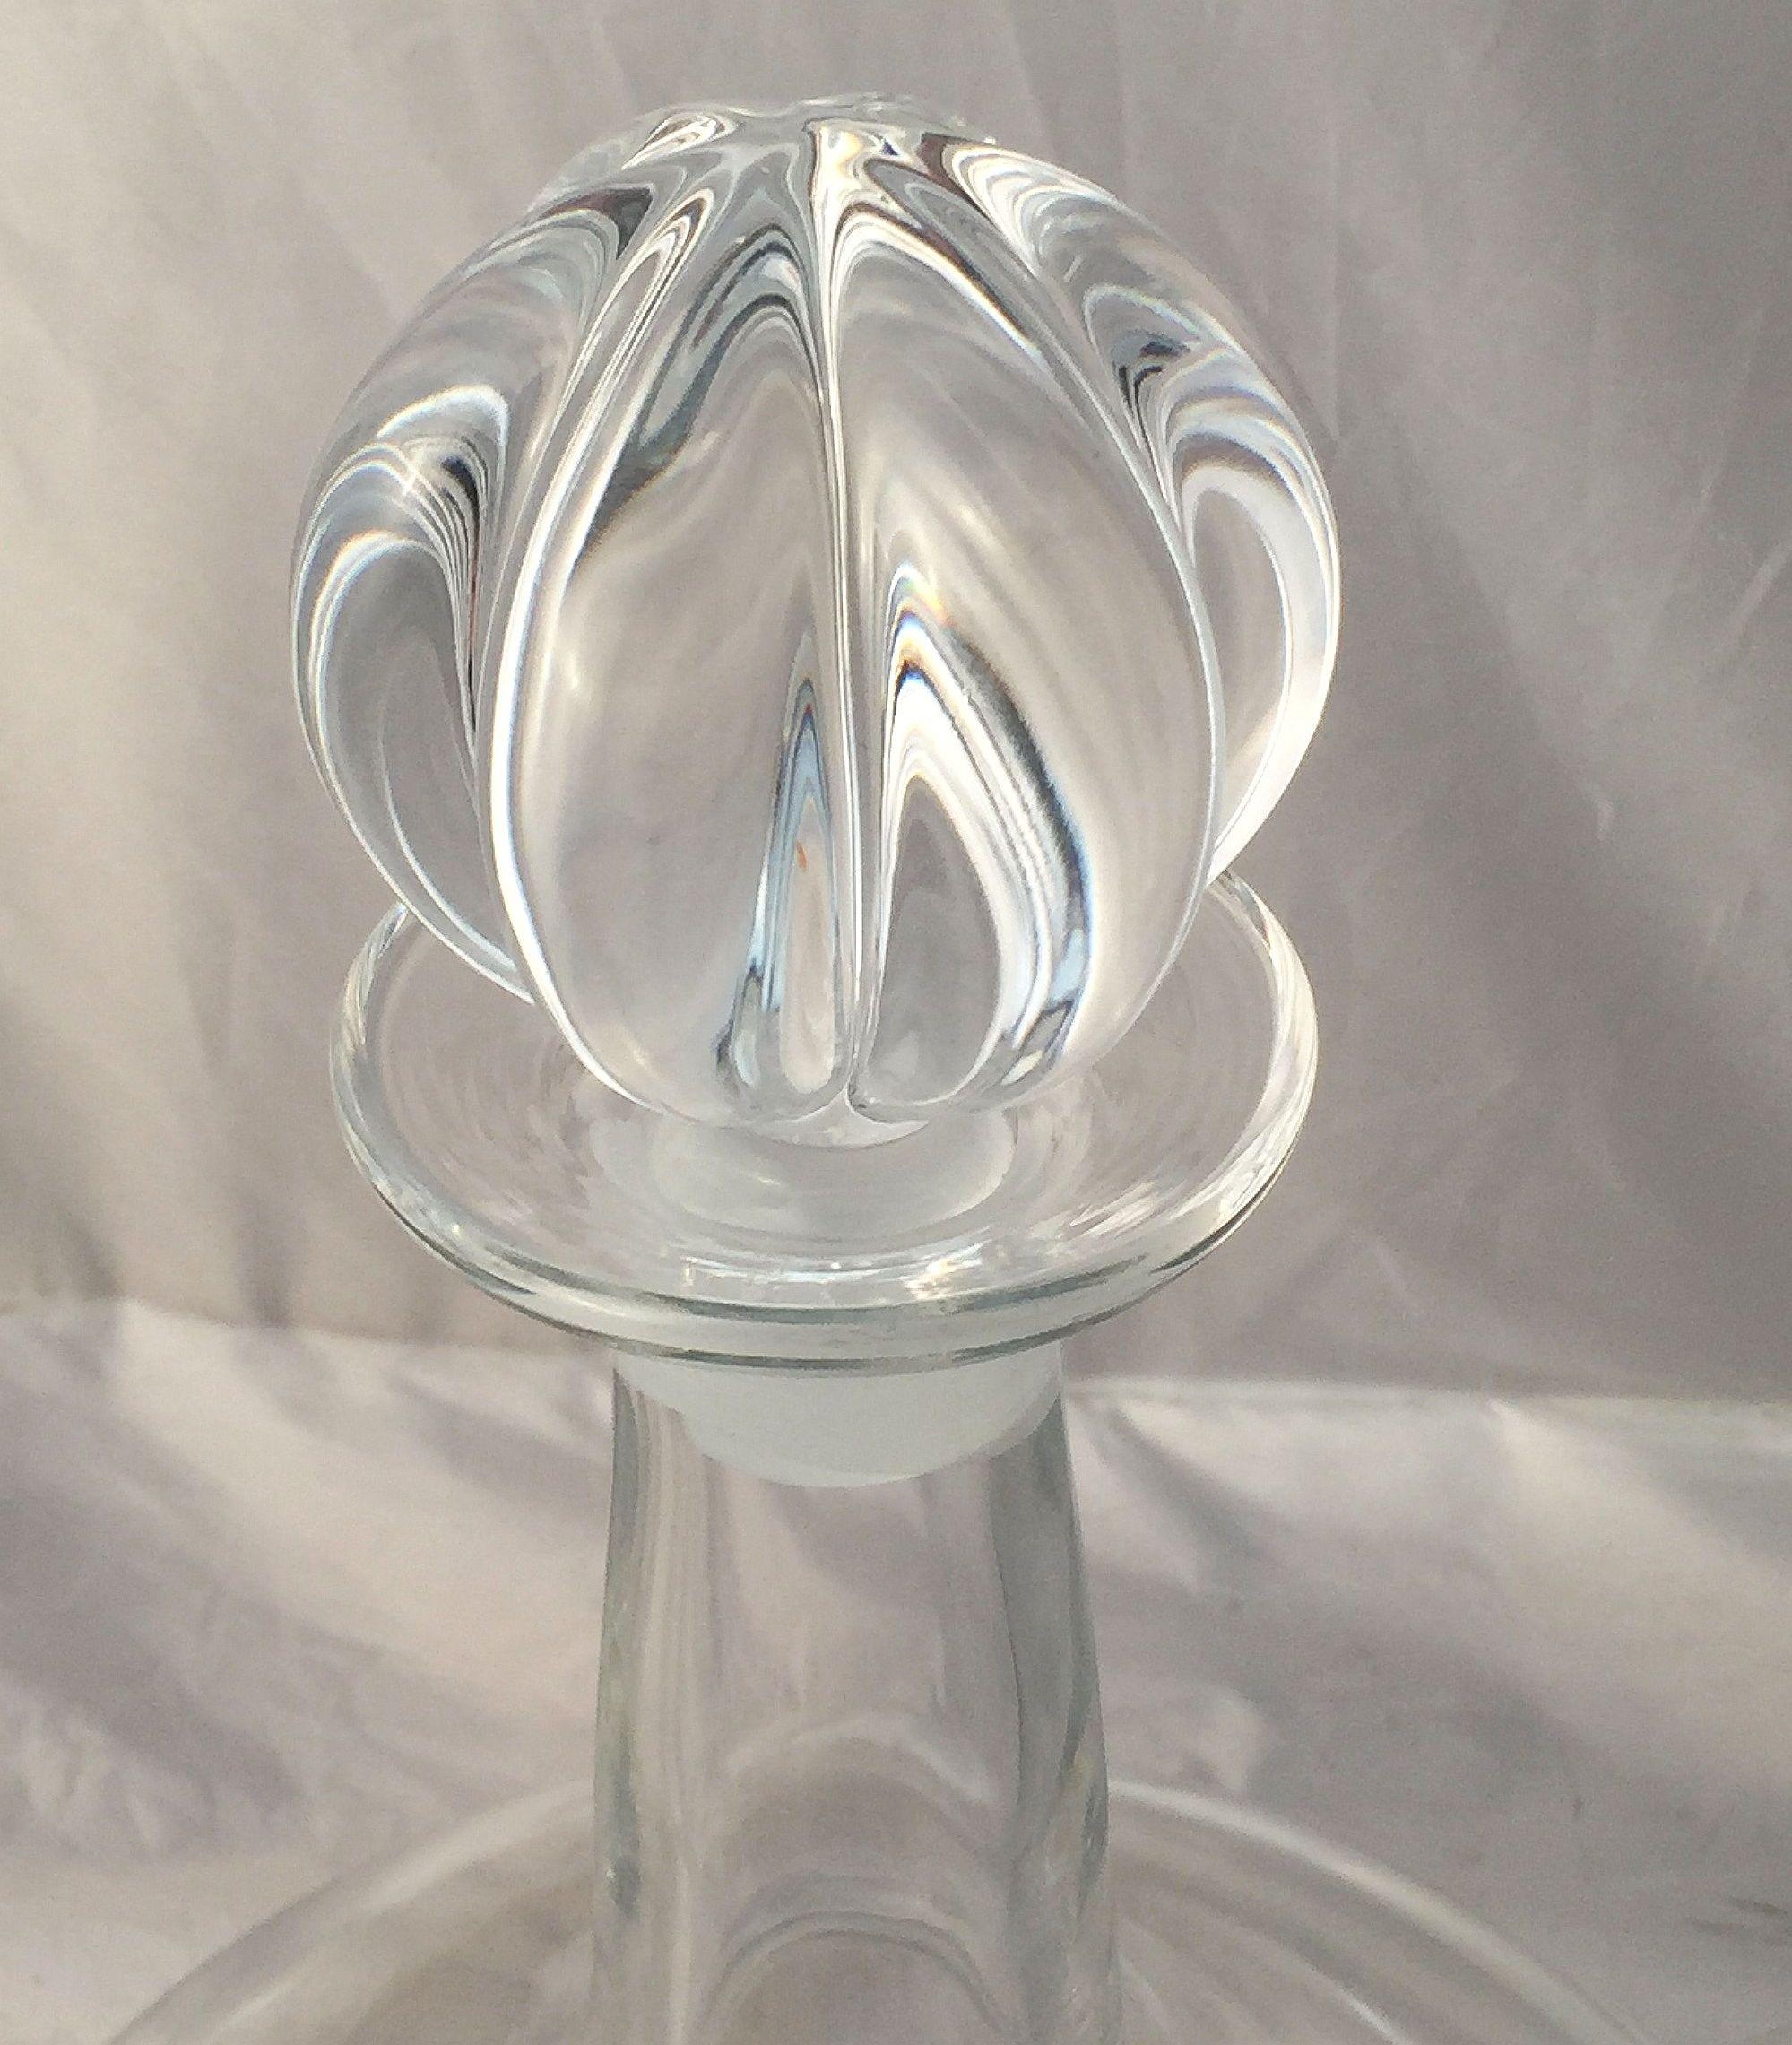 Orrefors Crystal Drinks Decanters by Nils Landberg 'Individually Priced' For Sale 3